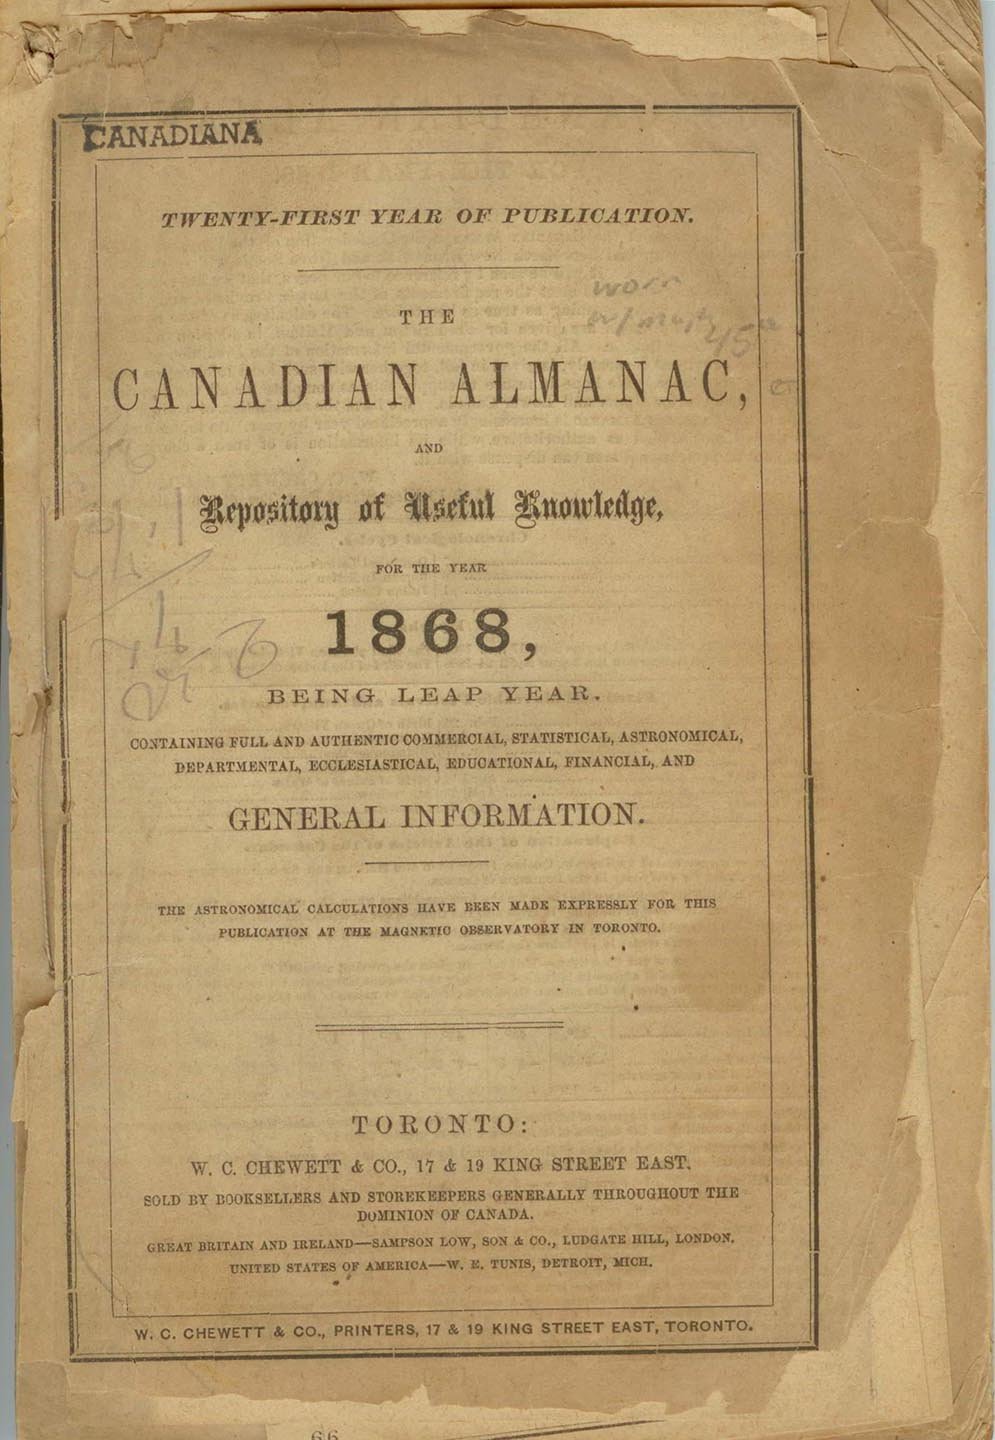 The Canadian Almanac, and Repository of Useful Knowledge for the Year 1868